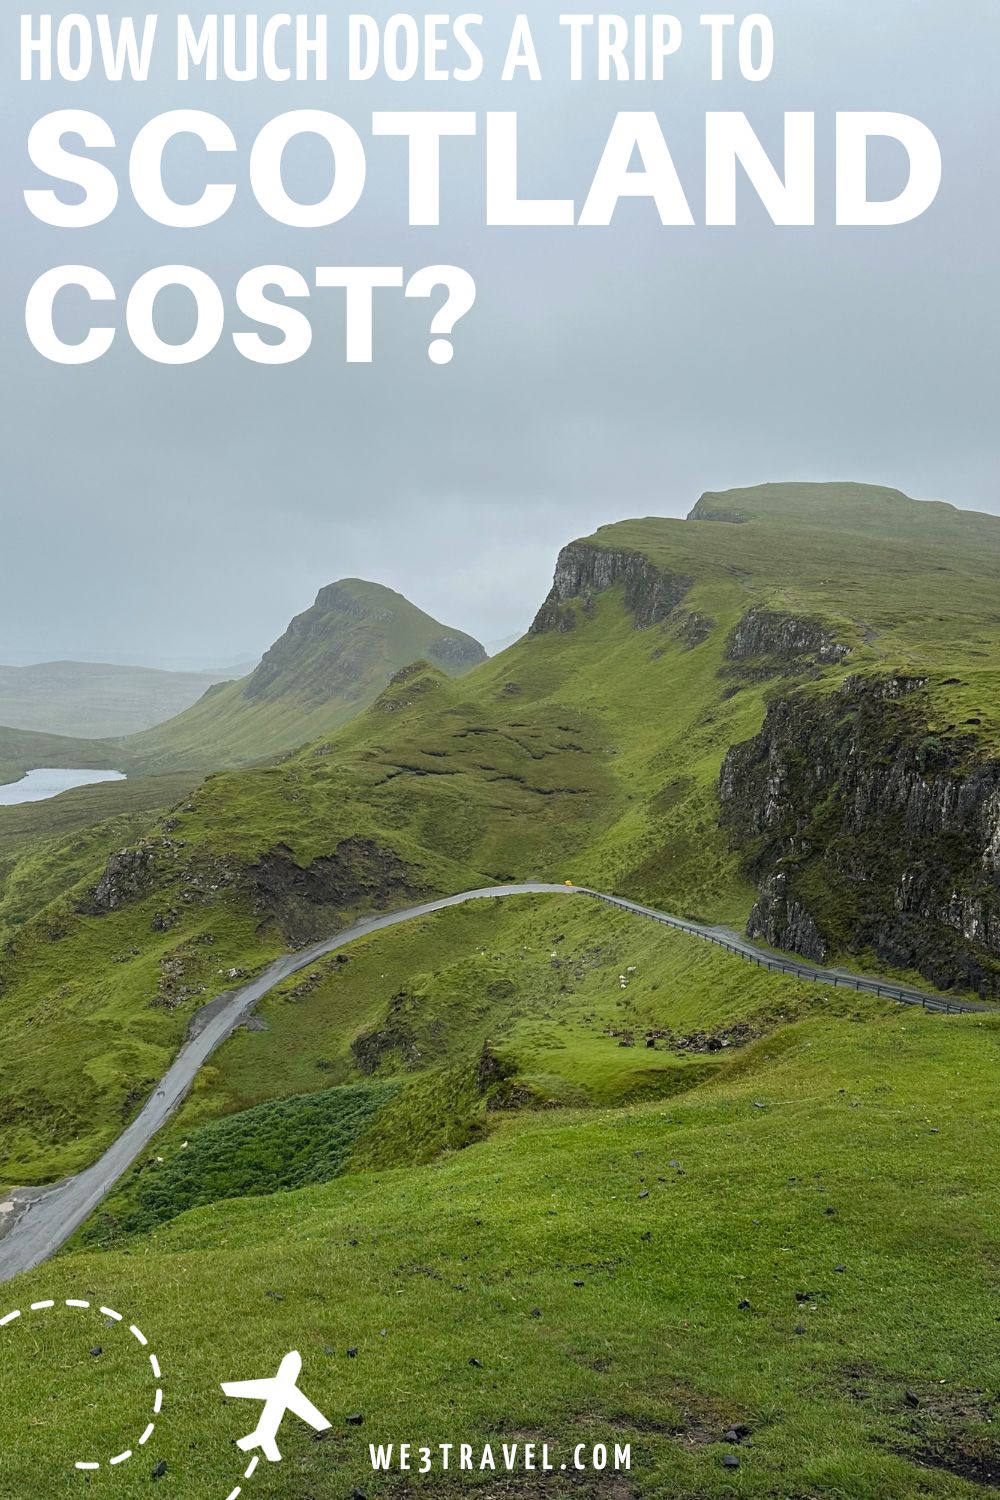 How much does a Scotland trip cost? Before you book your Scottish vacation, make your Scotland travel budget with this guide that breaks down travel costs to provide an accurate cost estimate based on personal travel experience. 